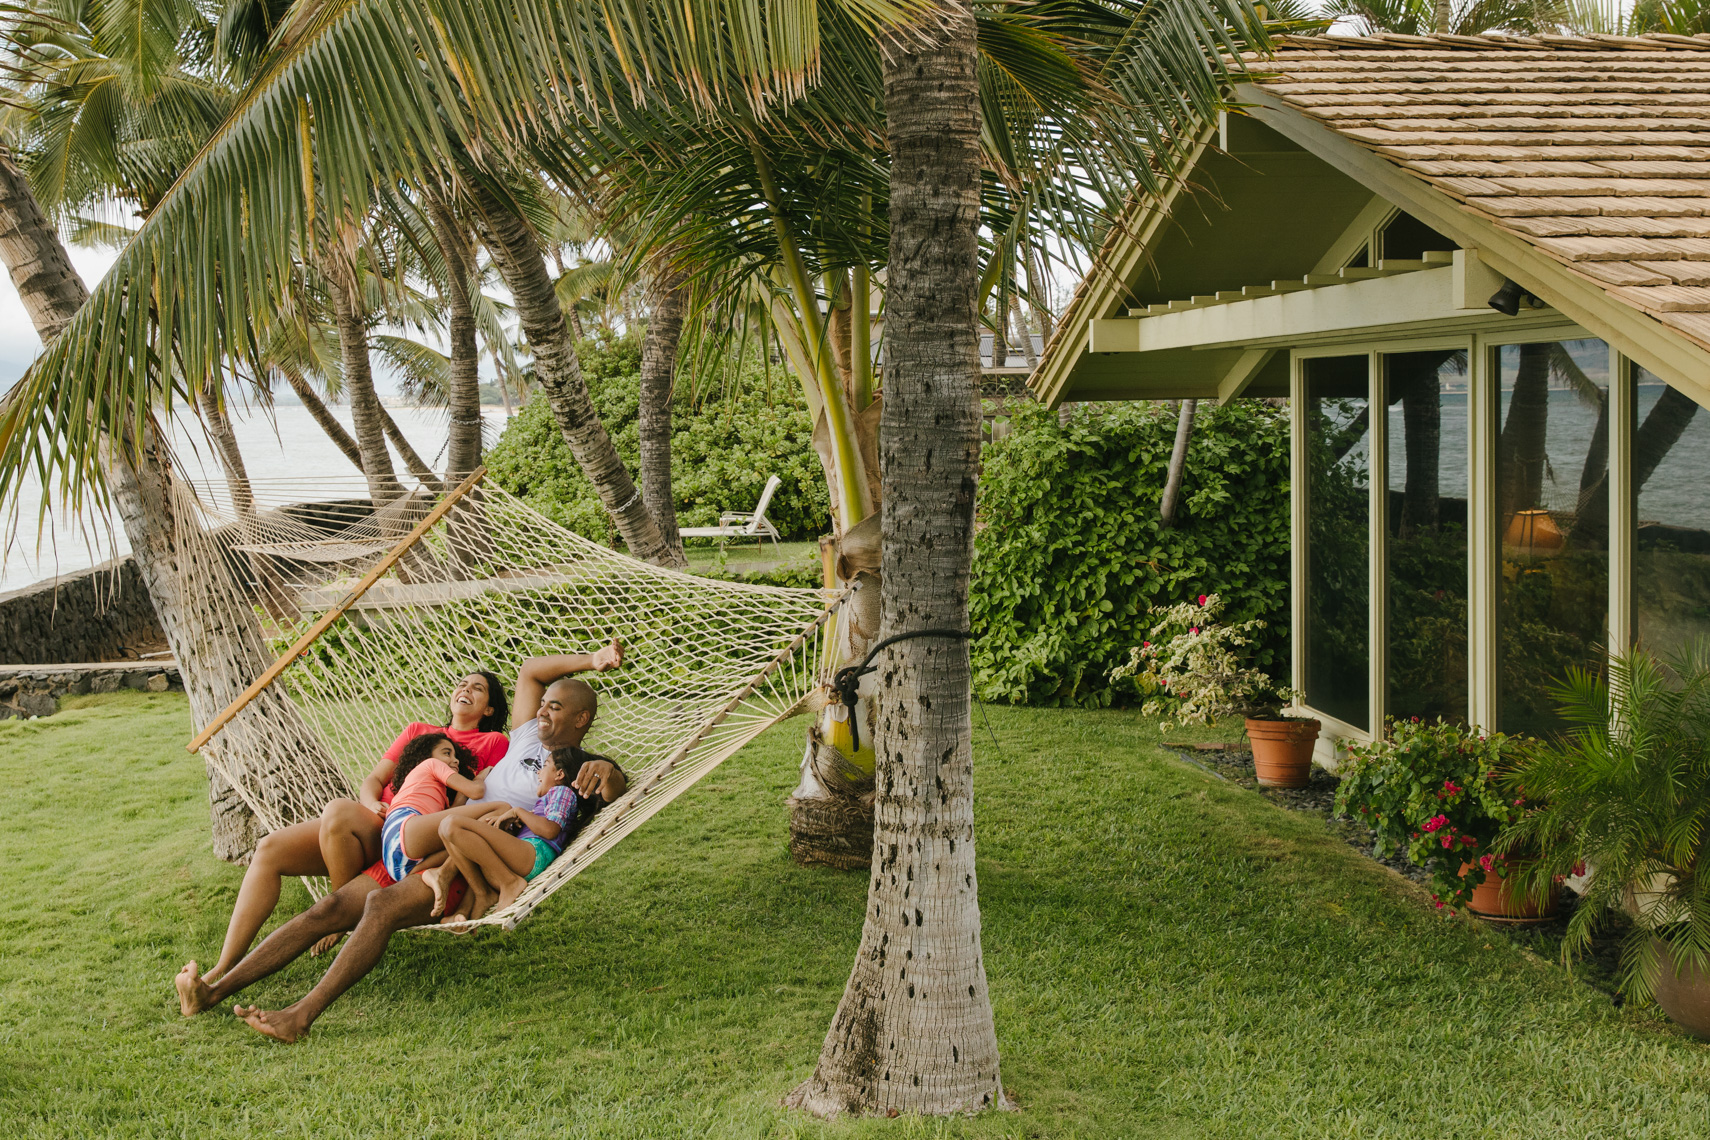 Lifestyle image by SternRep photographer Farhad Samari of a family relaxing and laughing together in a hammock between two palm trees